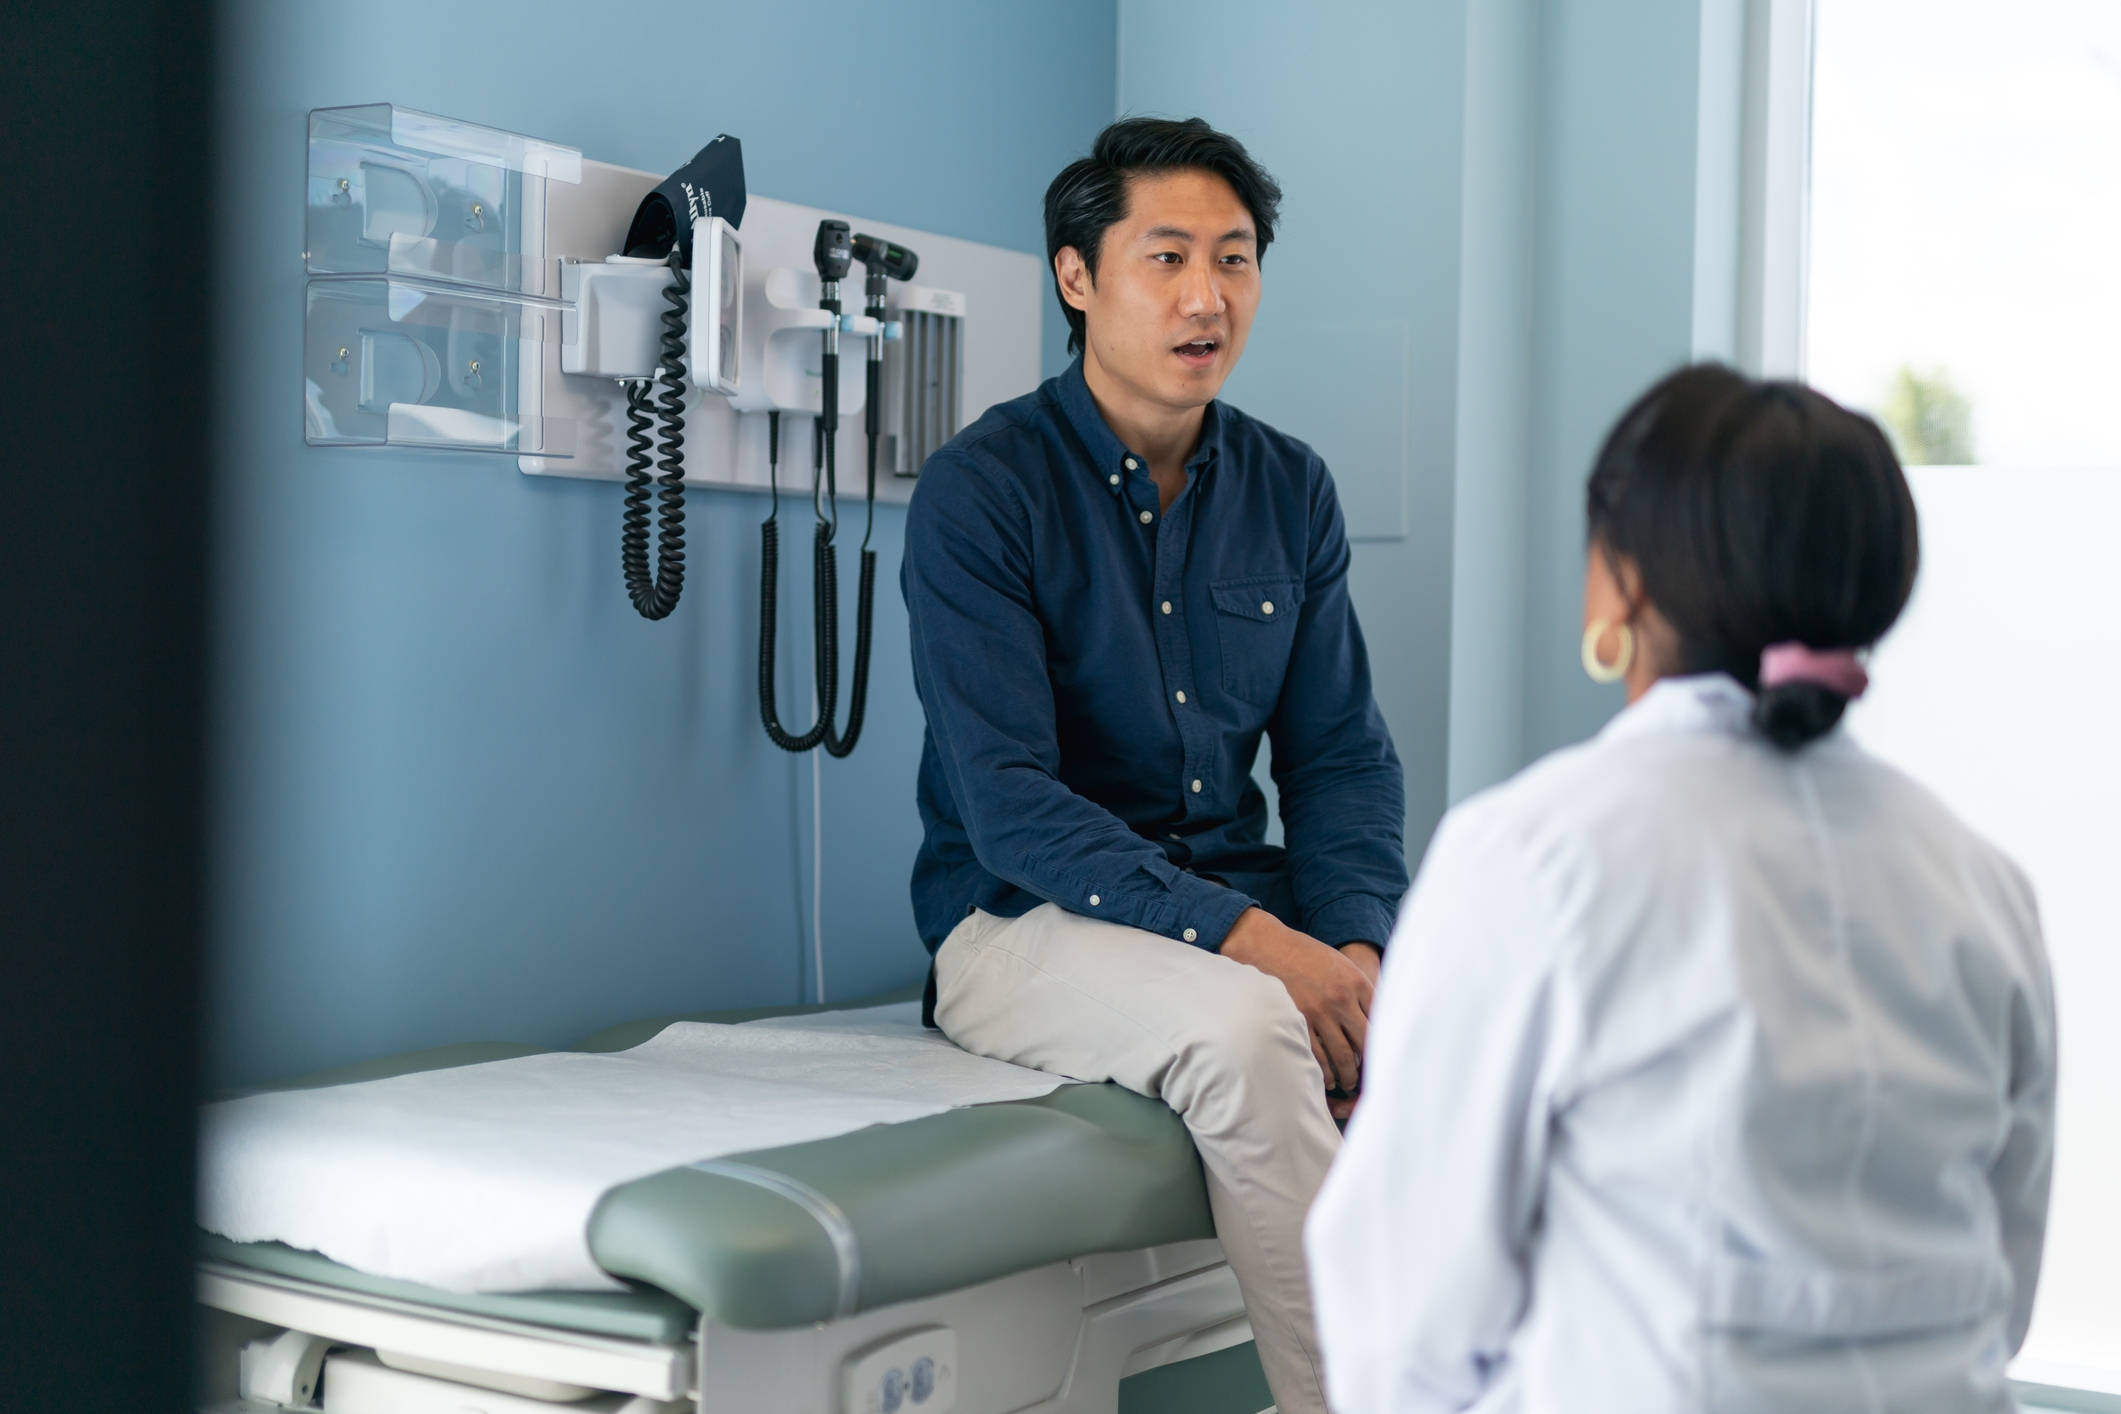 Male patient speaking with a female doctor.